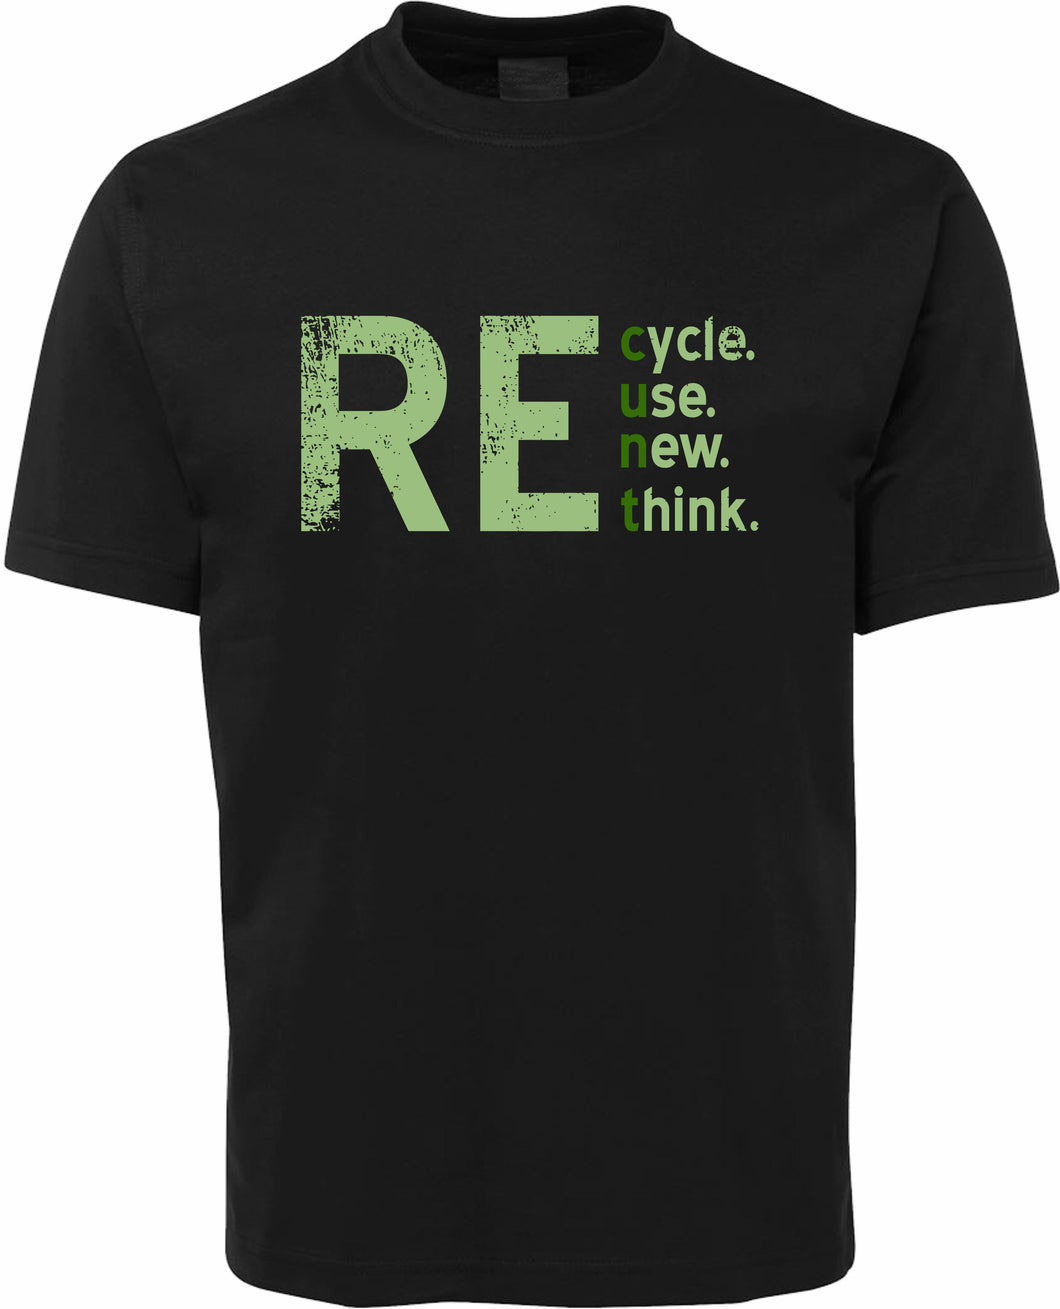 *NEW* Recycle Reuse T-Shirt